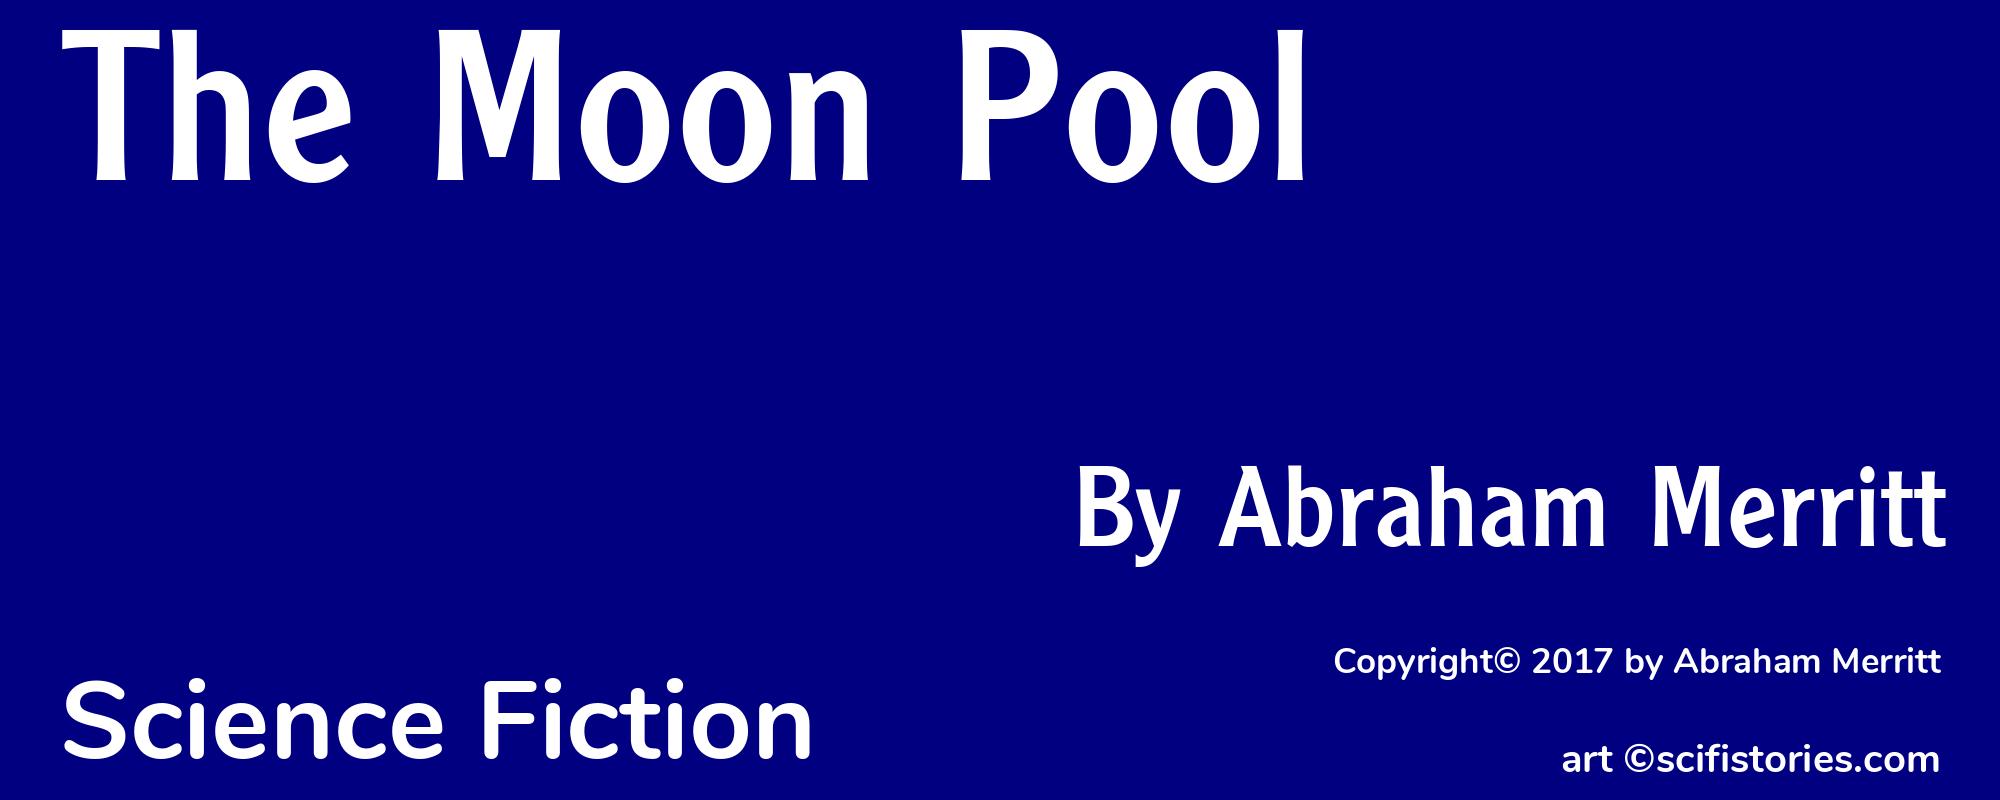 The Moon Pool - Cover